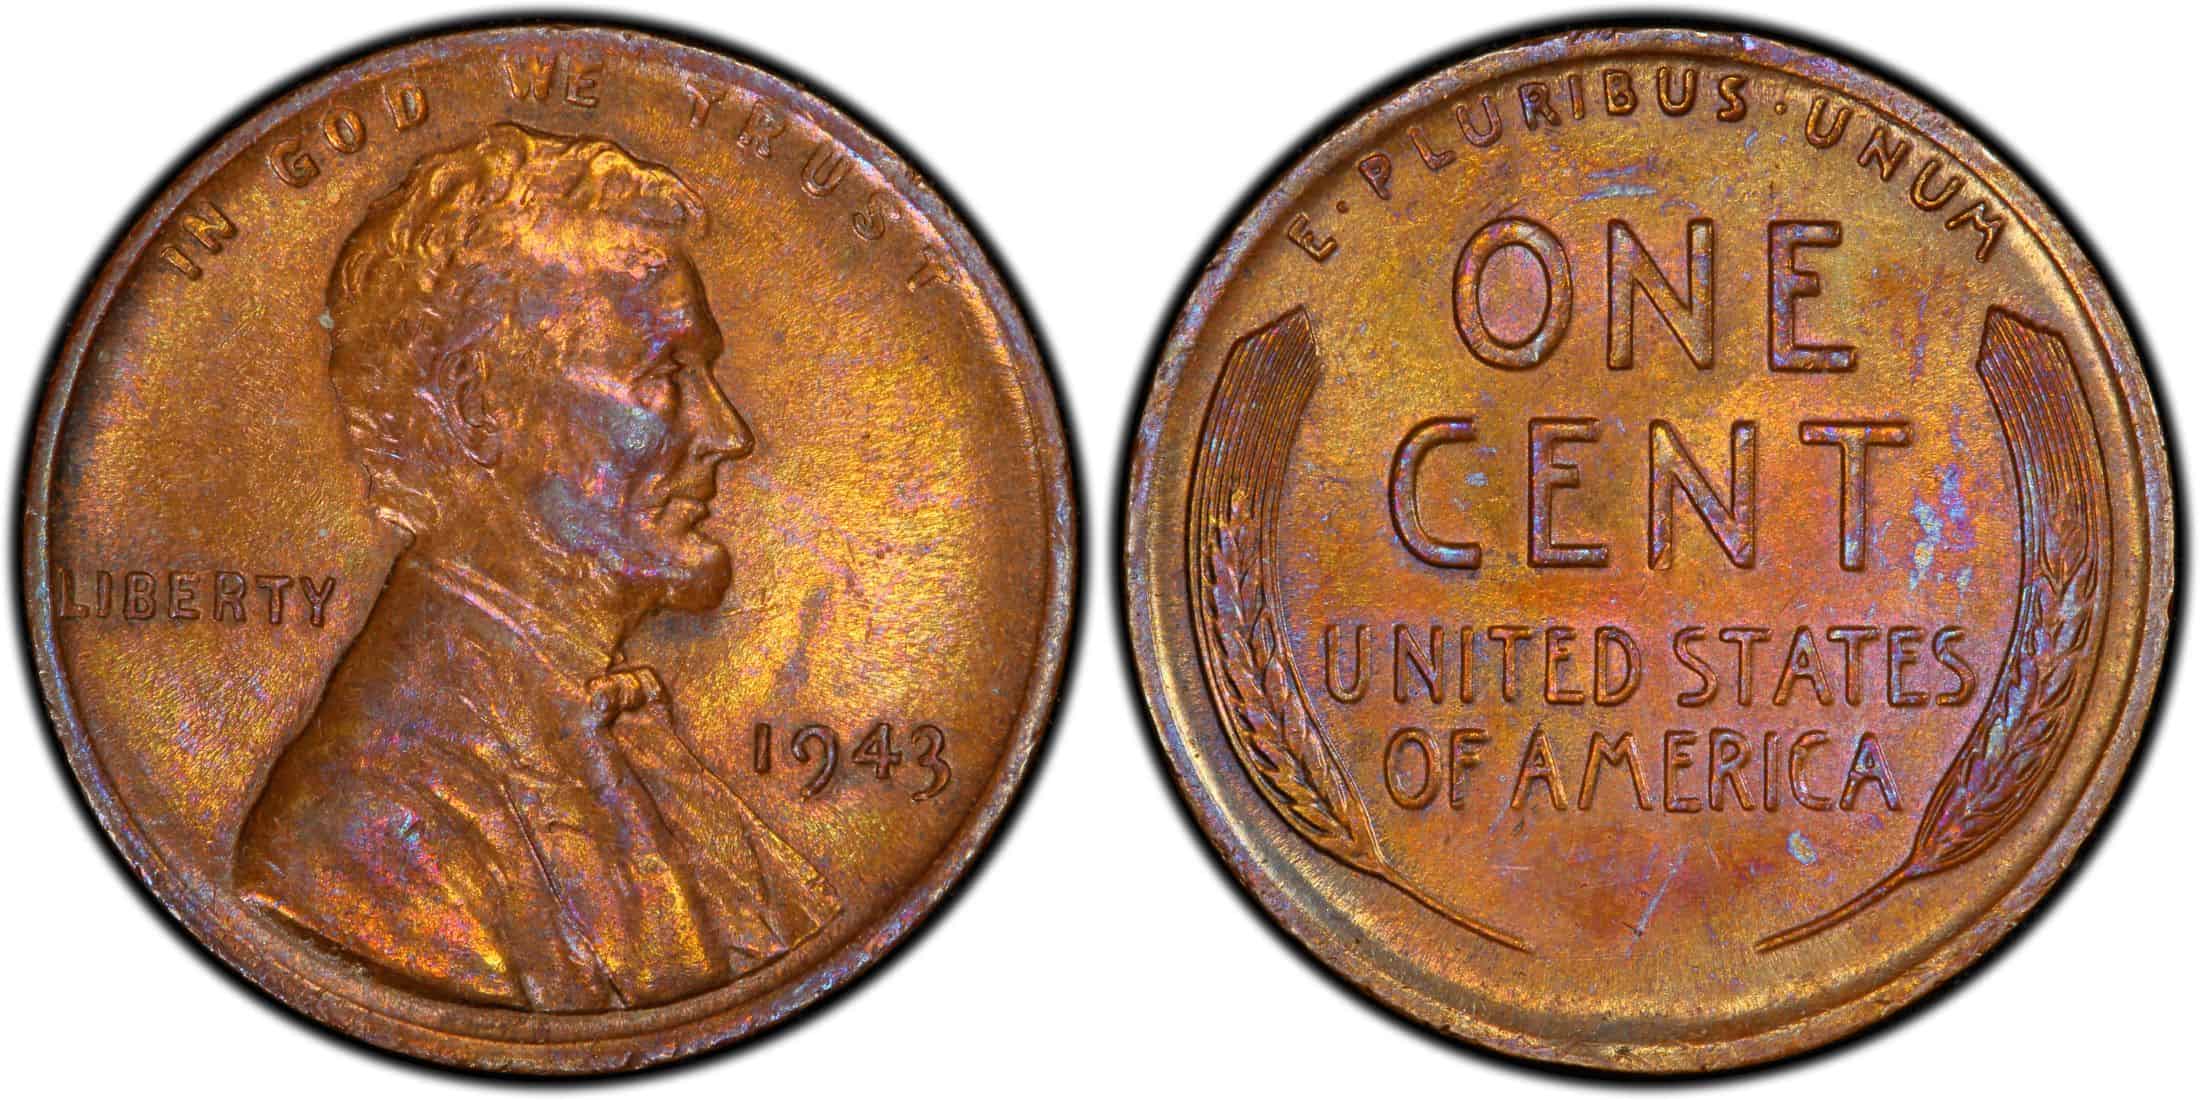 How to Grade the 1943 Copper Penny